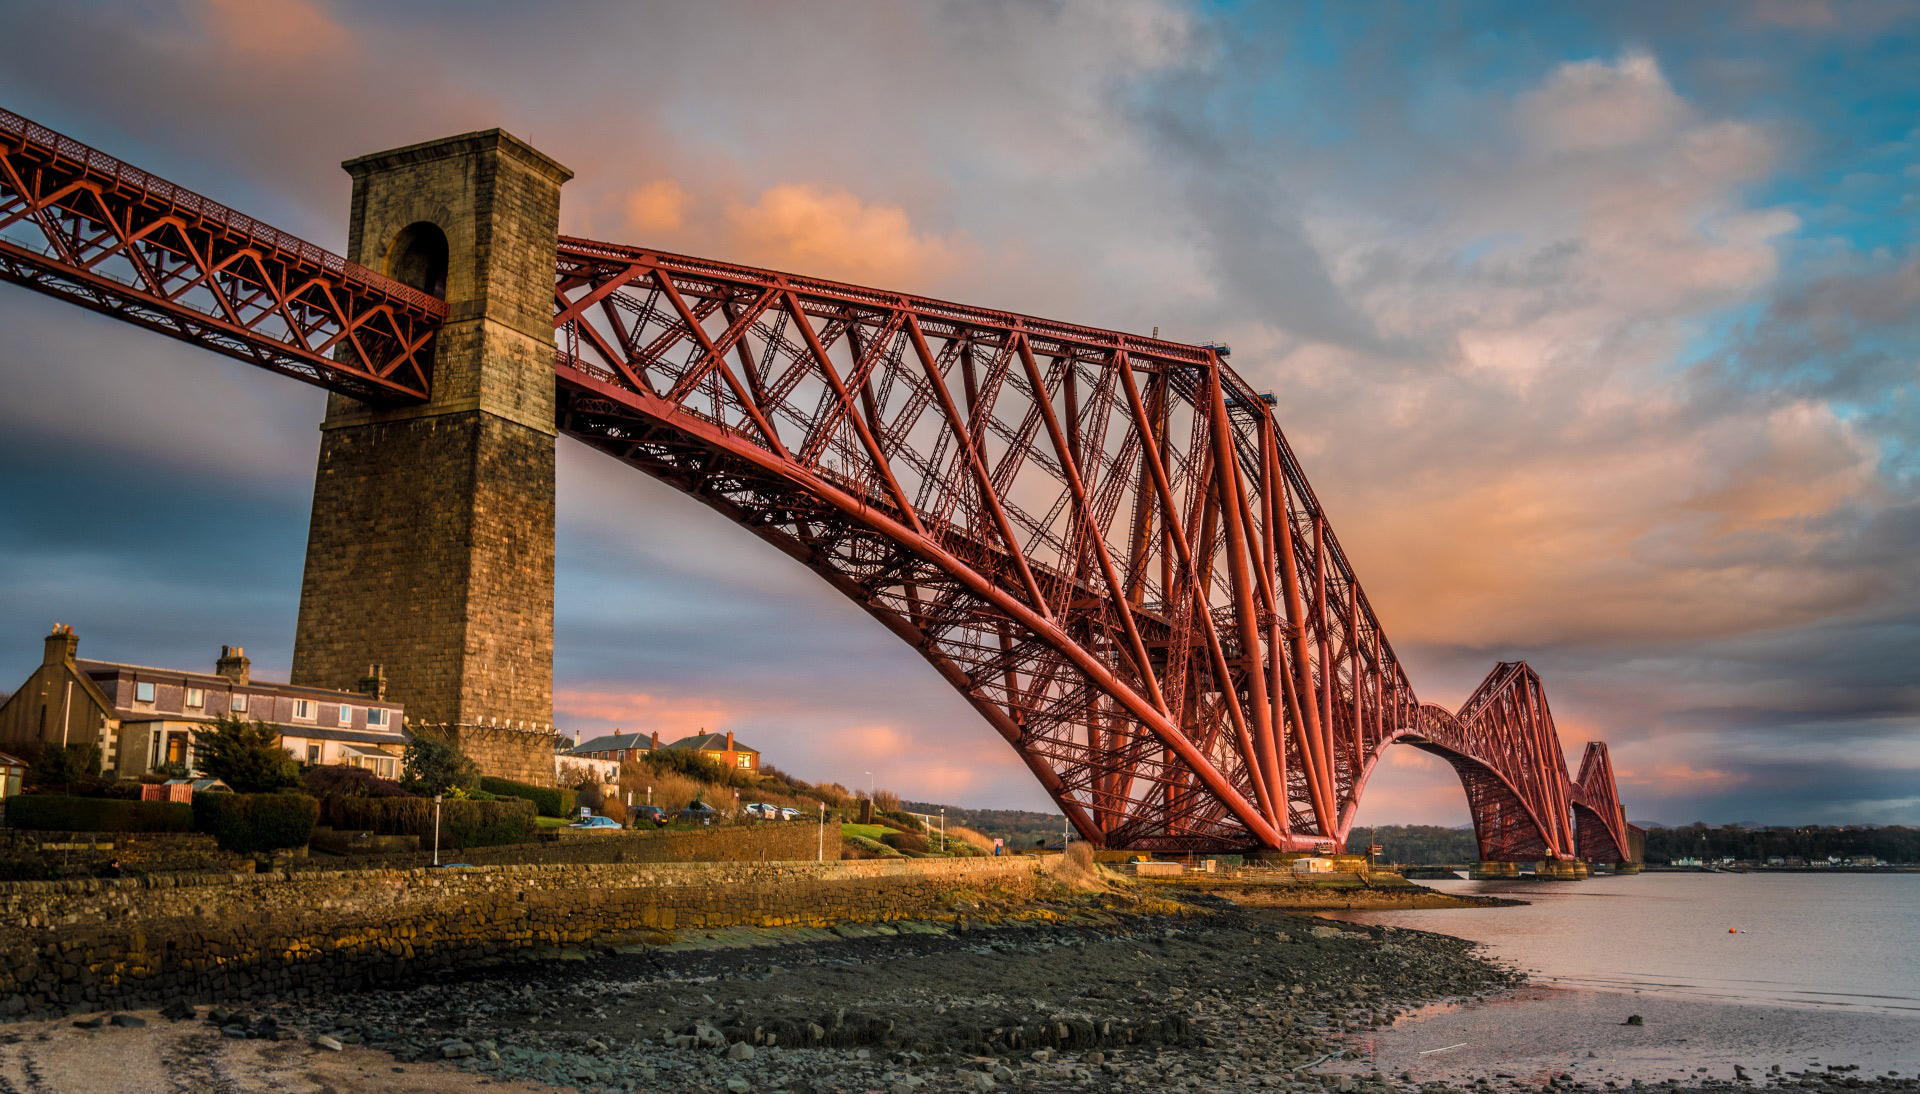 Celebrating World Heritage Day and the Forth Bridge